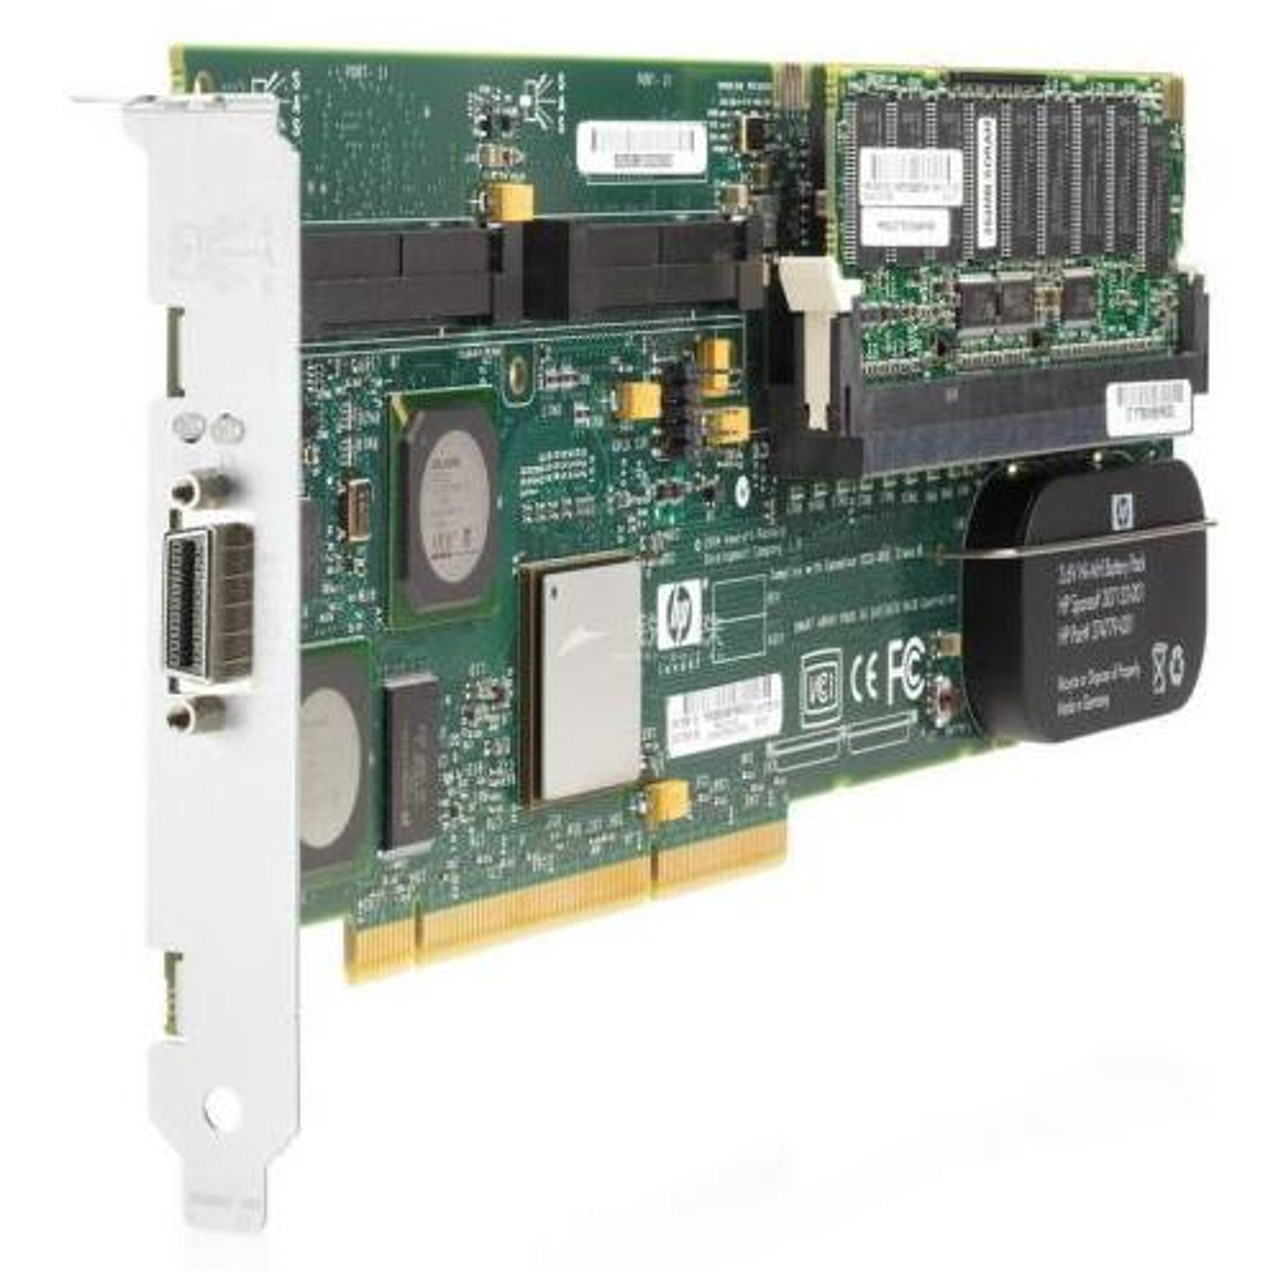 012336-000 HP Smart Array P600 PCI-X 8-Channel 64-Bit SAS RAID Controller Card with 256MB Battery Backed Write Cache